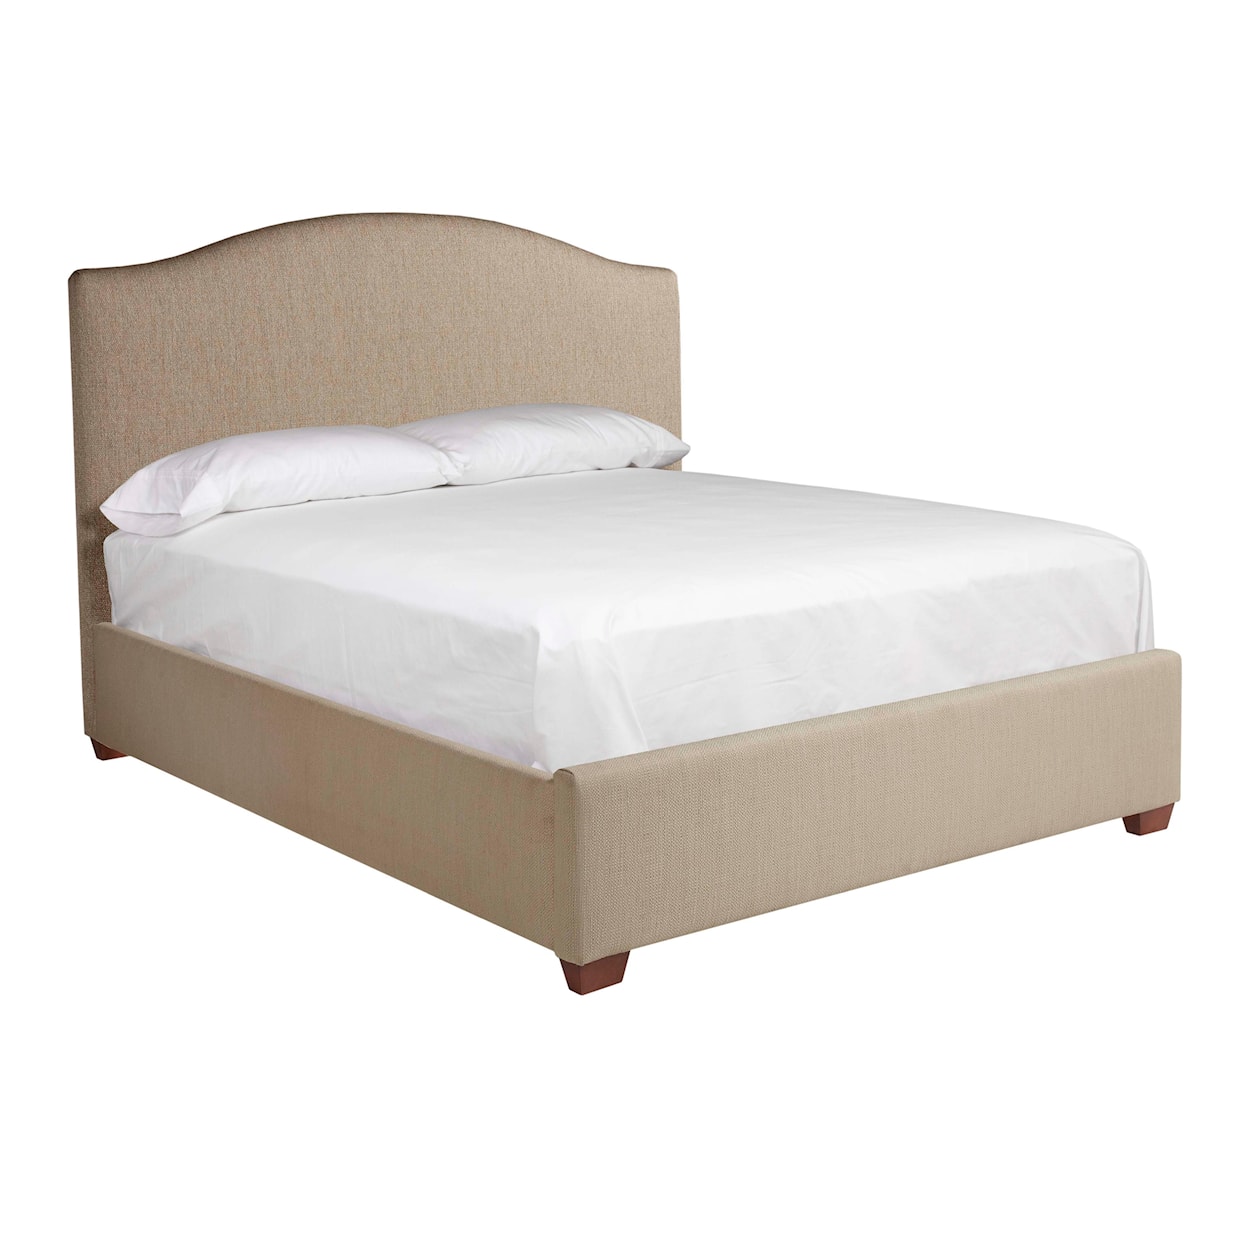 Kincaid Furniture Upholstered Beds Dover Queen Headboard